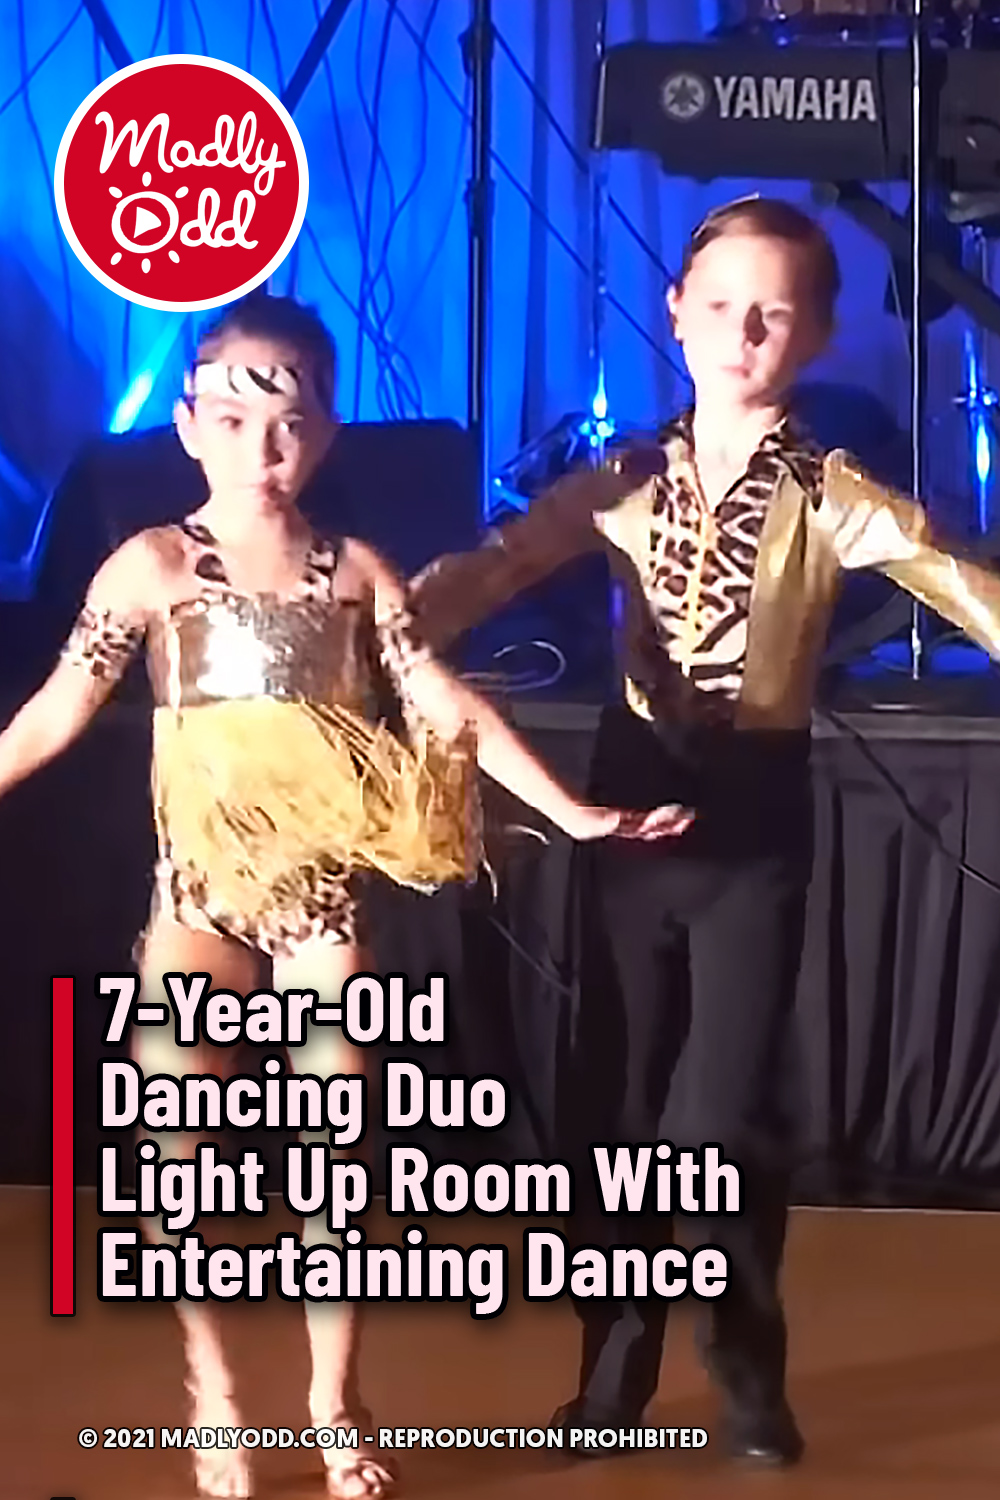 7-Year-Old Dancing Duo Light Up Room With Entertaining Dance